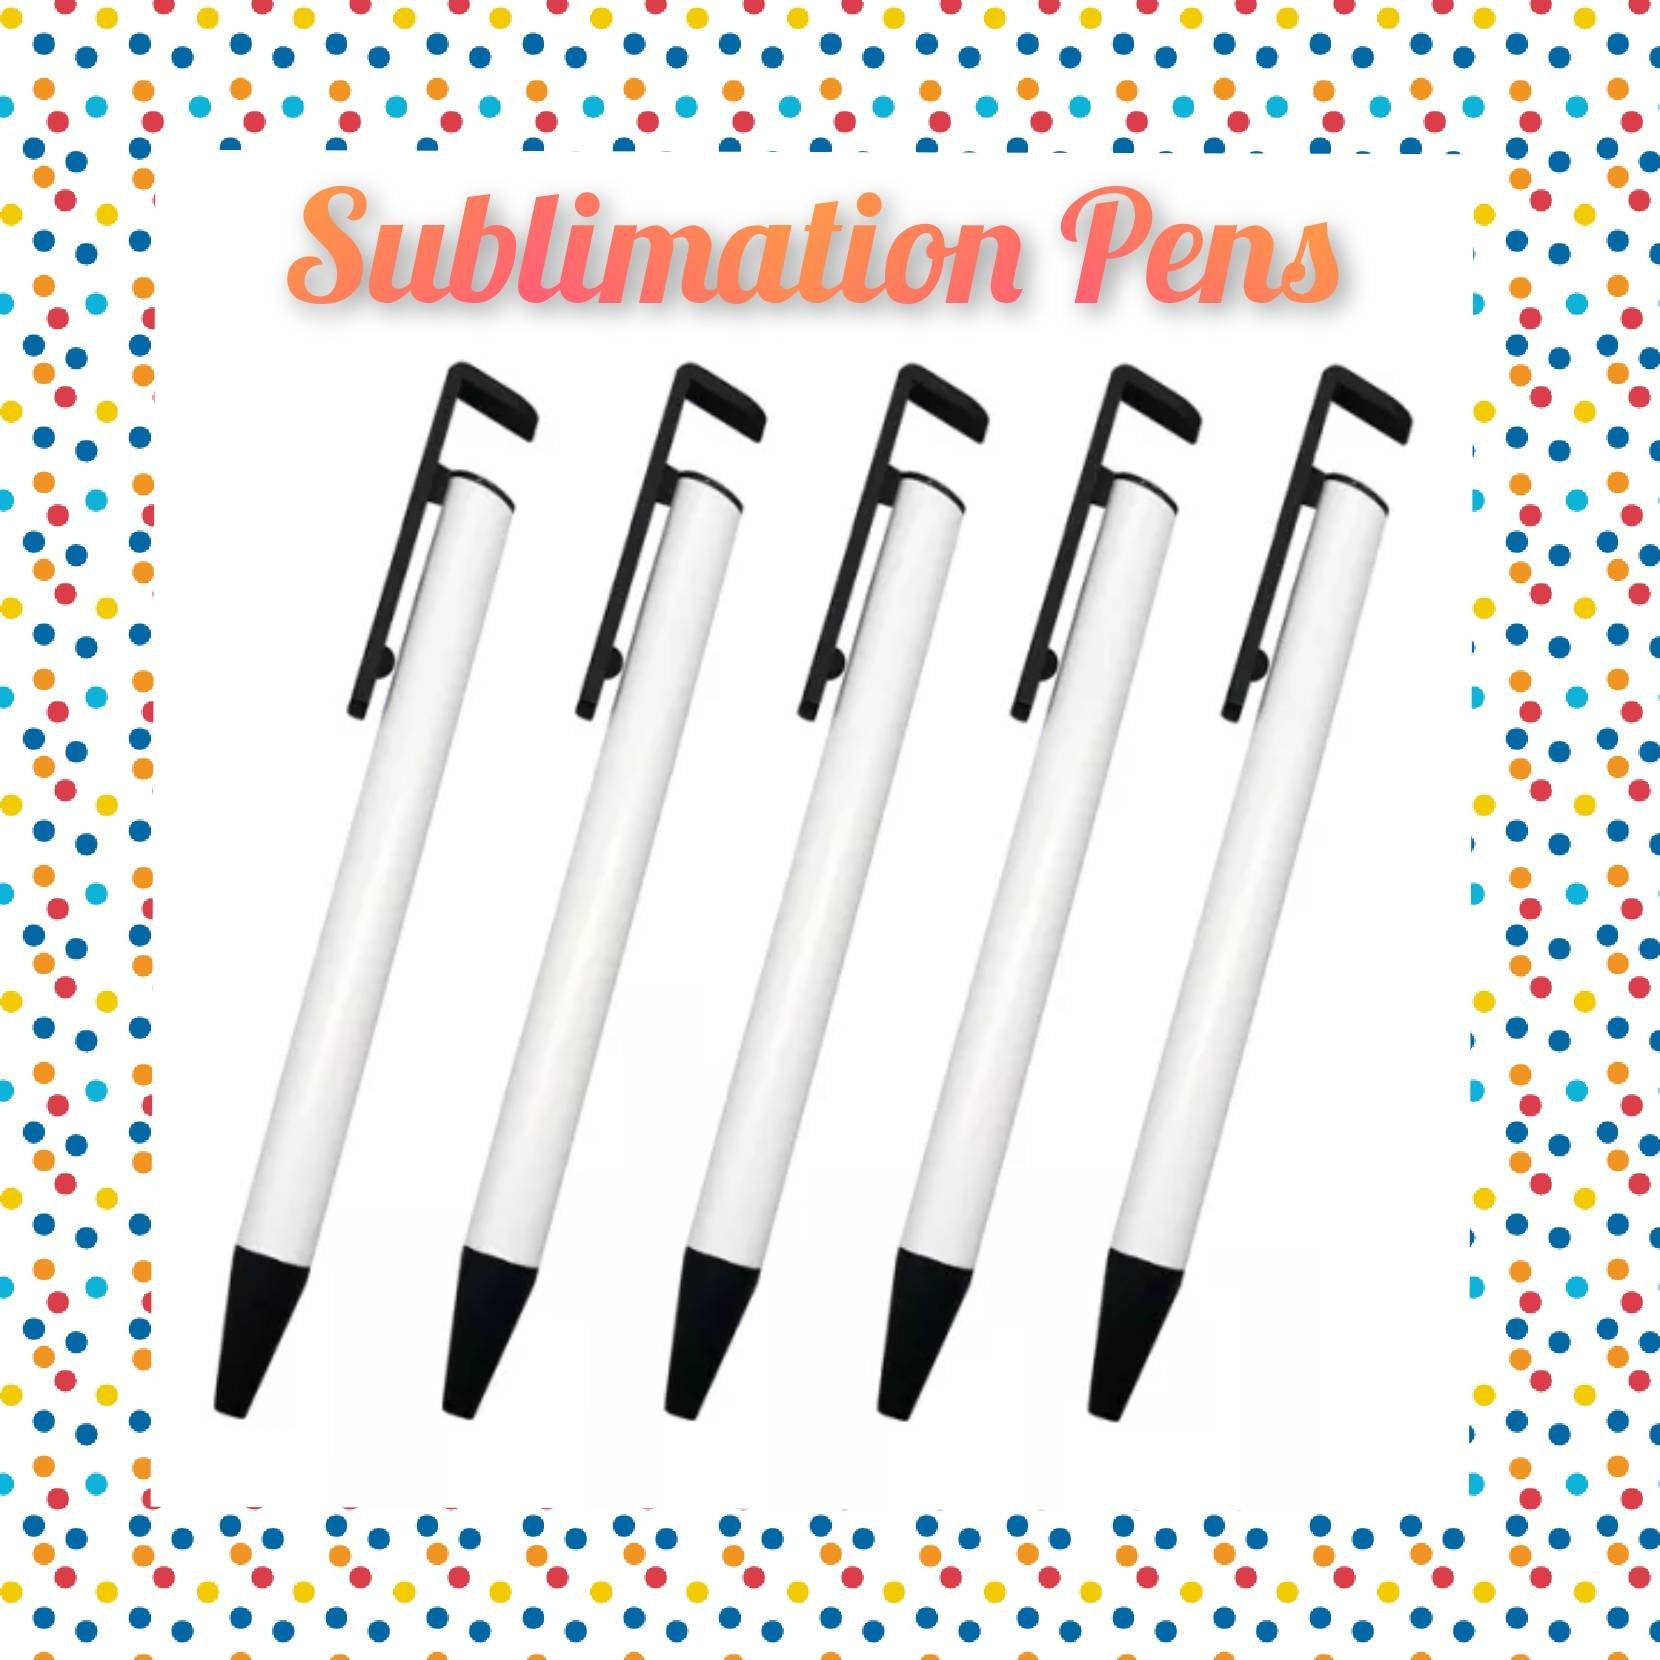 10 Pcs Sublimation Pens Blanks PLUS 2 Sublimation Pen Wraps Ready to Use  With EACH Pack,with Shrinkwrap That Doubles as a Mobile Phone Stand 